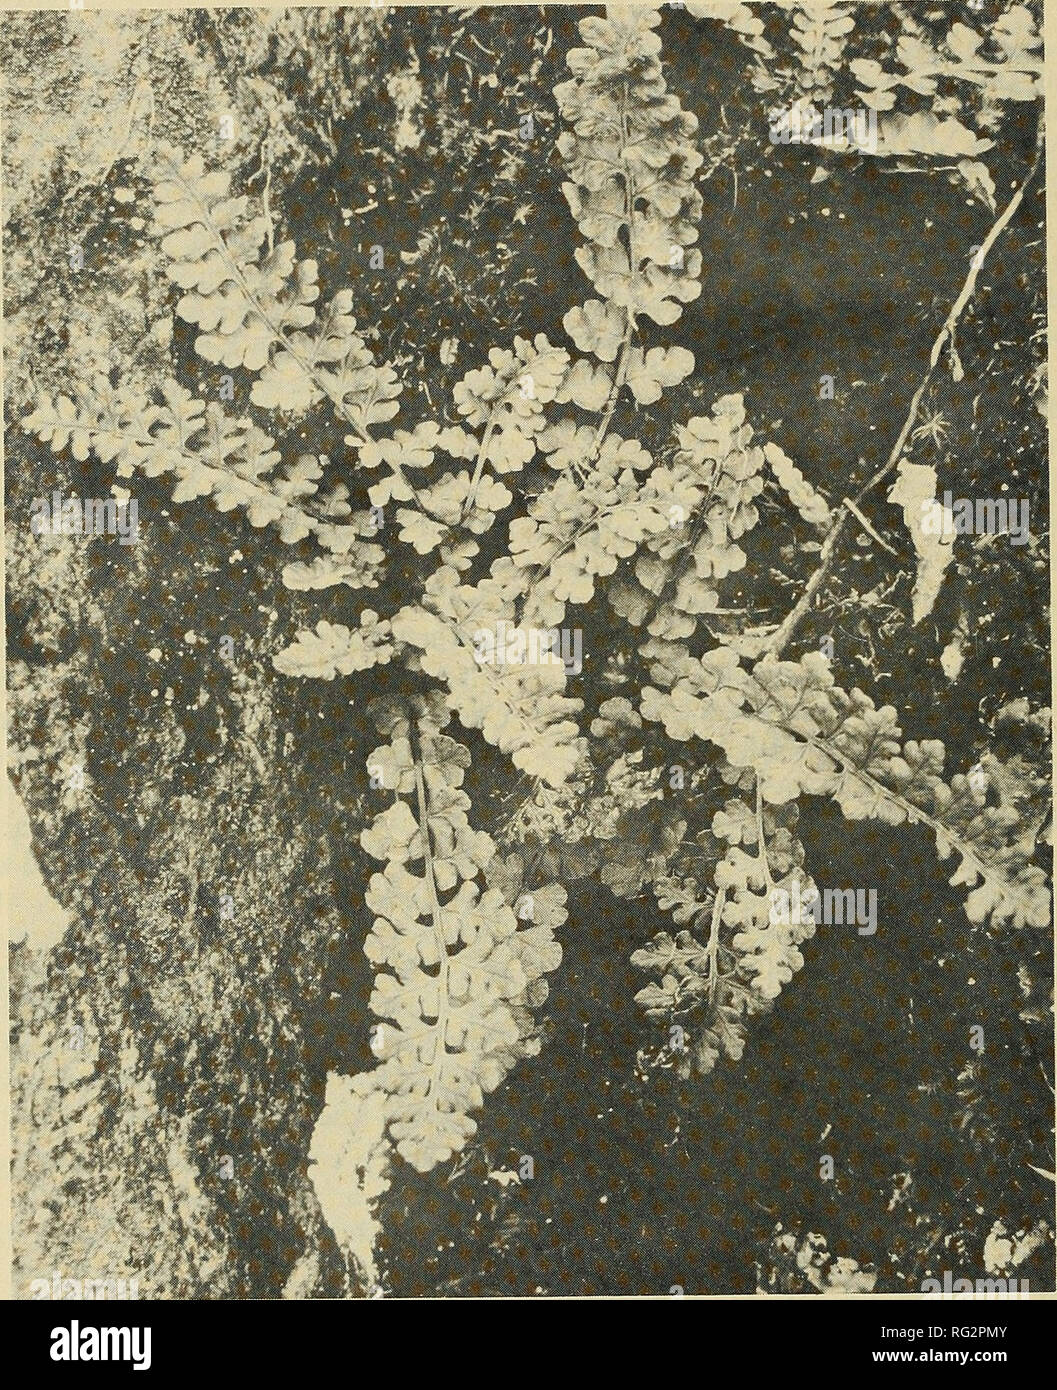 . The Canadian field-naturalist. 178 The Canadian Field-Naturalist Vol. 89. Figure 1. Woodsia alpina photographed at Jeffrey Lake, August 1974. Acknowledgments I am grateful to K. L. Mcintosh, S. M. McKay, and R. E. Whiting, for sharing in this discovery. W. H. Wagner and D. M. Britton confirmed identifications, and W. J. Cody kindly read the manuscript. Literature Cited Beschei, R. £., A. E. Garwood, R. Hainault, I. D. Macdonald, S. P. van der Kloet, and C. H. Zavitz. 1970. List of the vascular plants of the Kingston region. Fowler Herbarium, Queen's University, Kingston. 92 pp. Brown, D. F.  Stock Photo